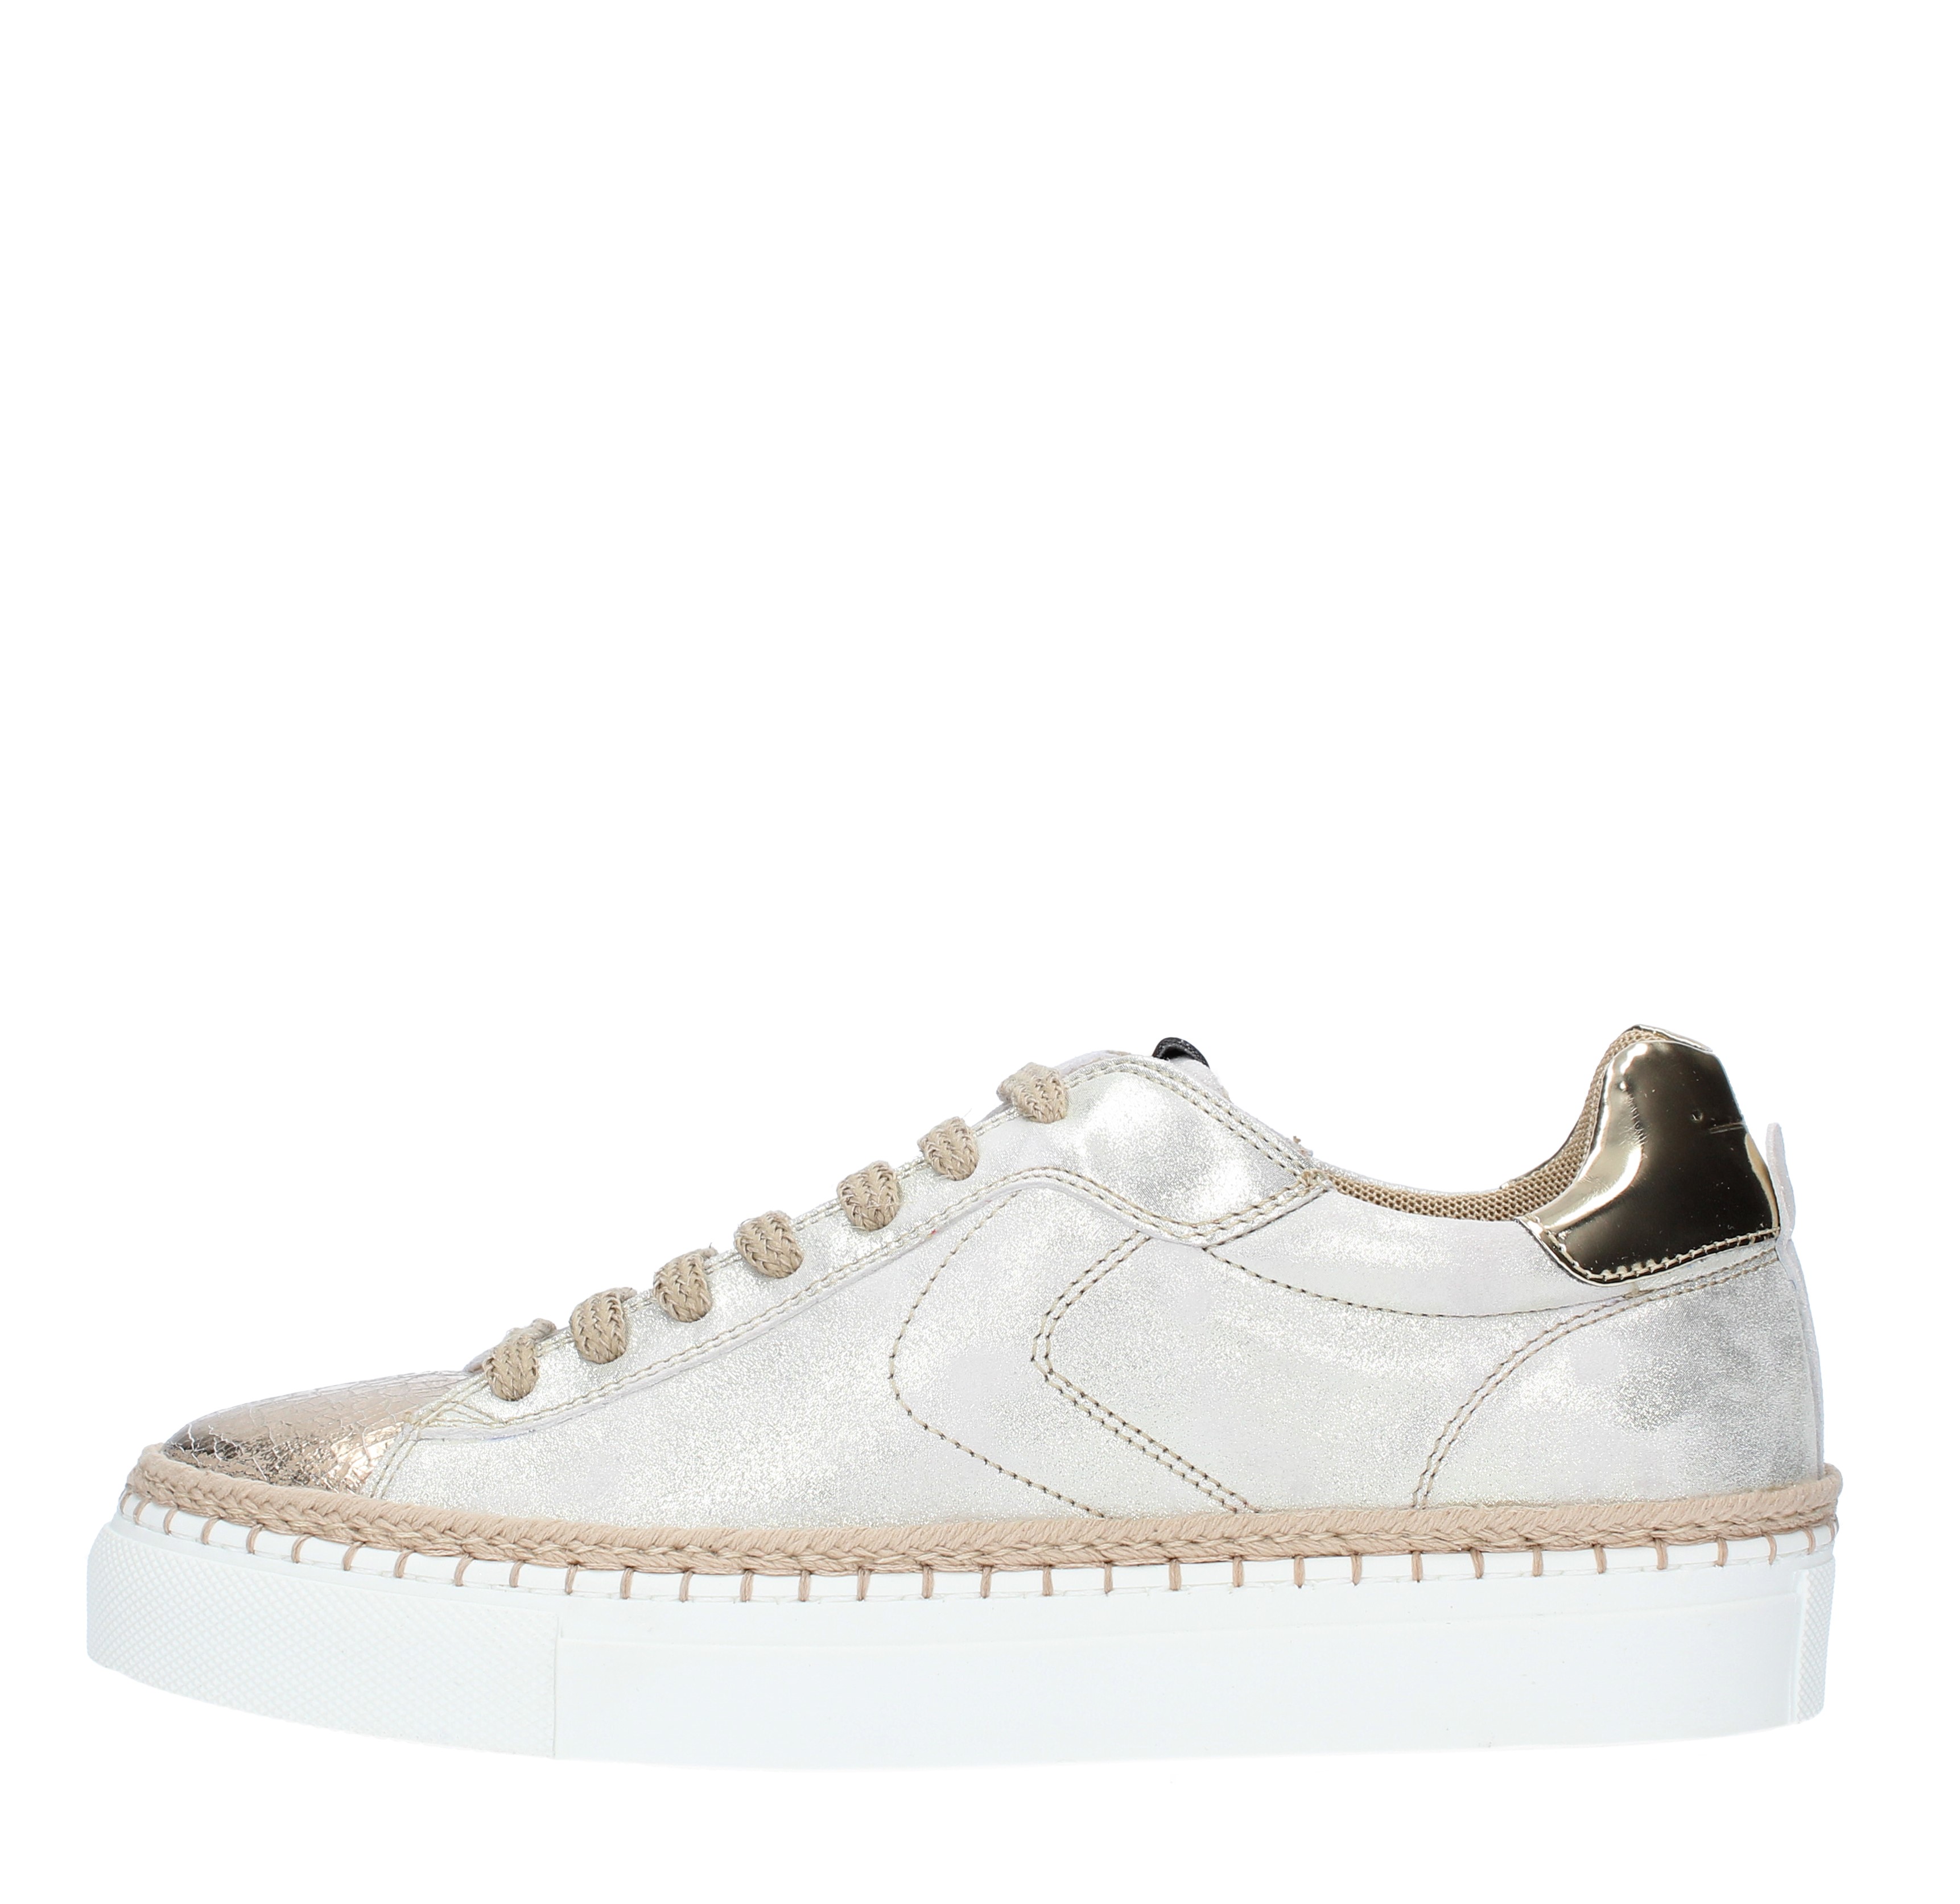 sneakers voile blanche - VOILE BLANCHE - Ginevra calzature